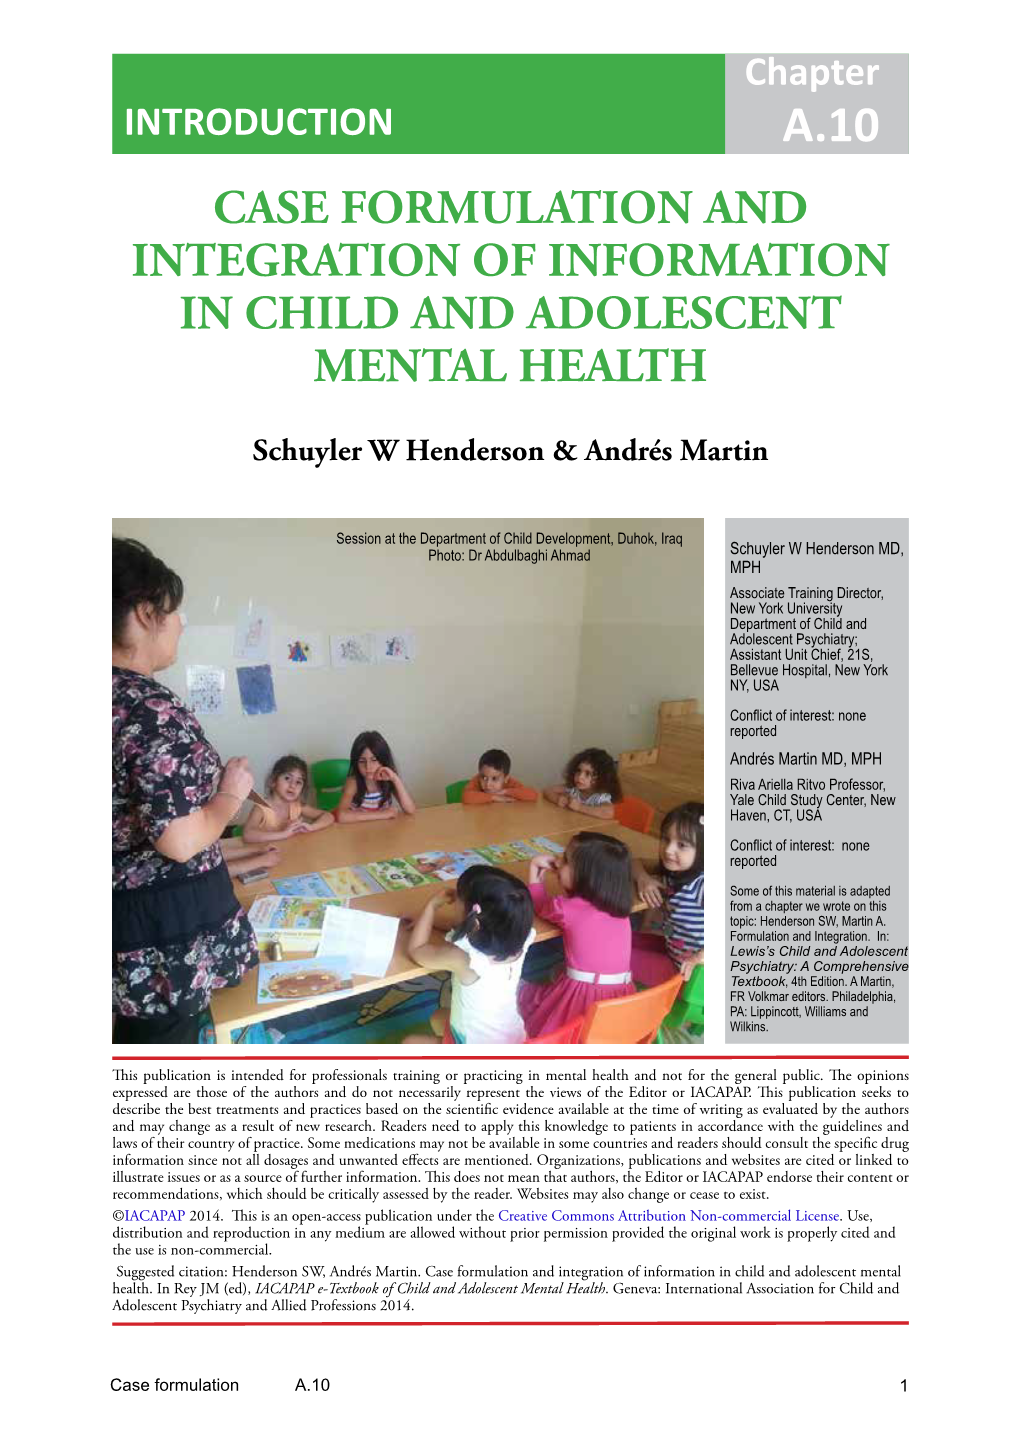 Case Formulation and Integration of Information in Child and Adolescent Mental Health